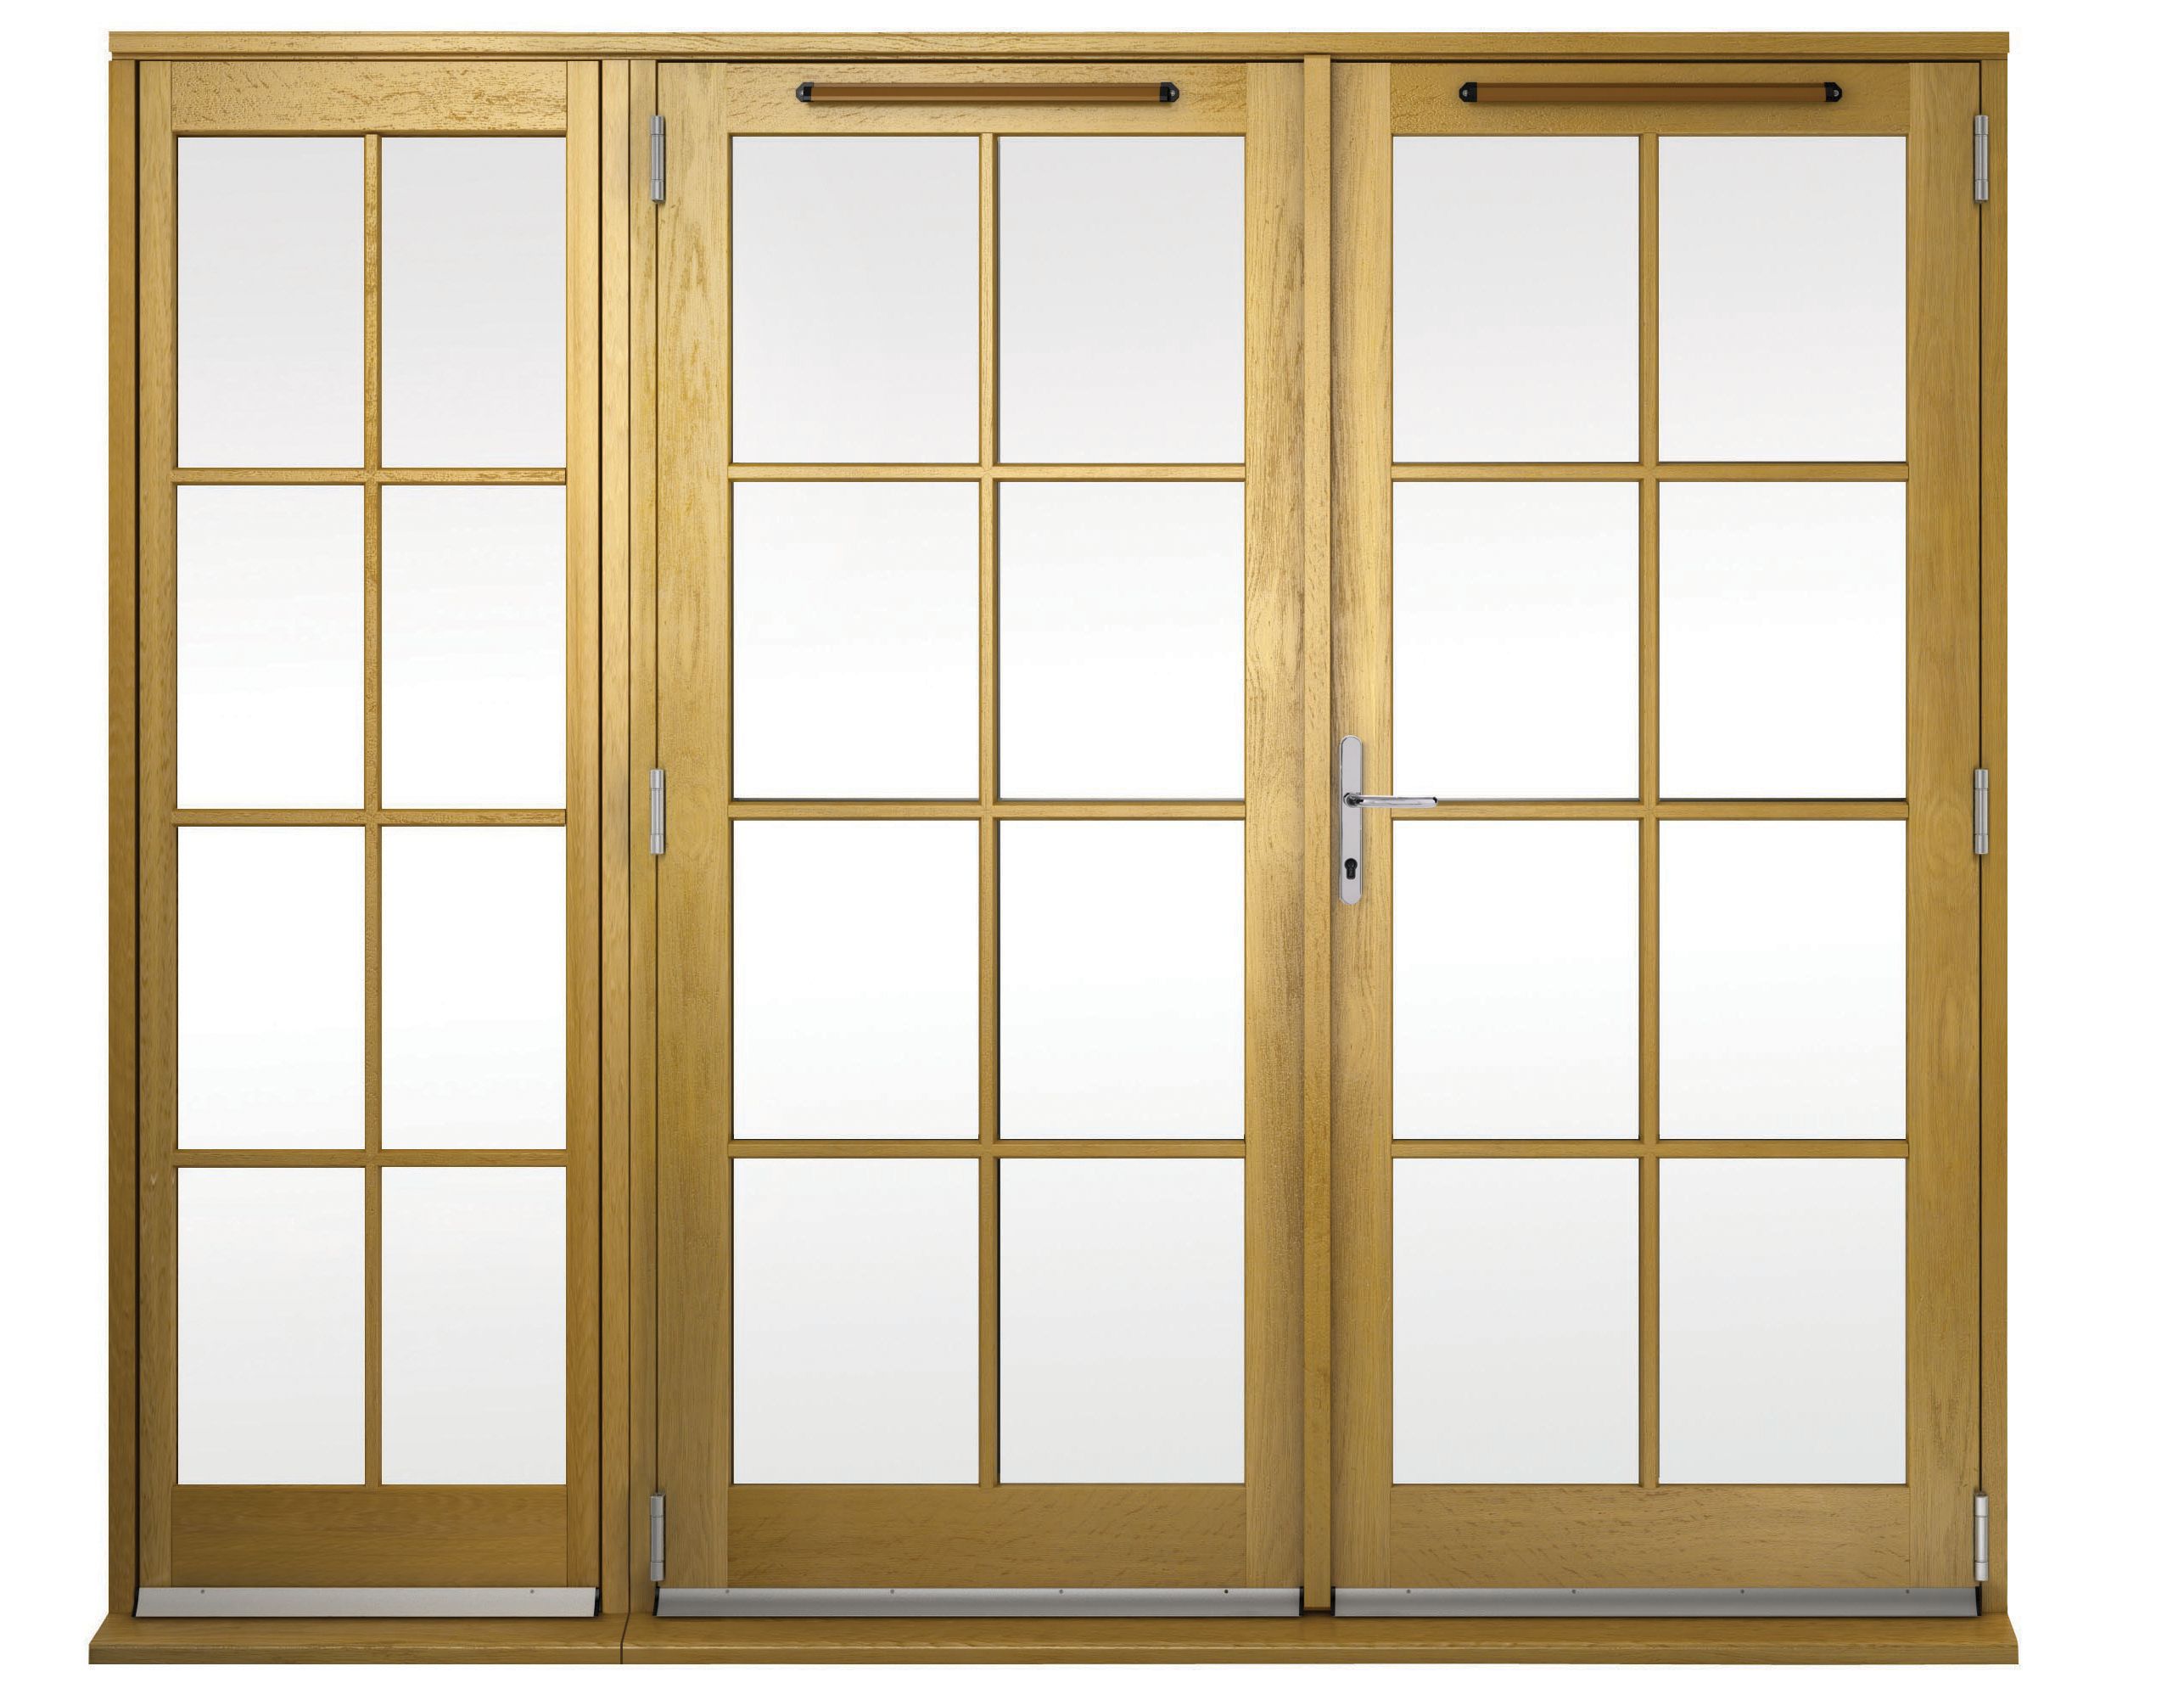 Image of Wickes Albery Georgian Bar Solid Oak Laminate French Doors 7ft with 1 Side Lite 600mm